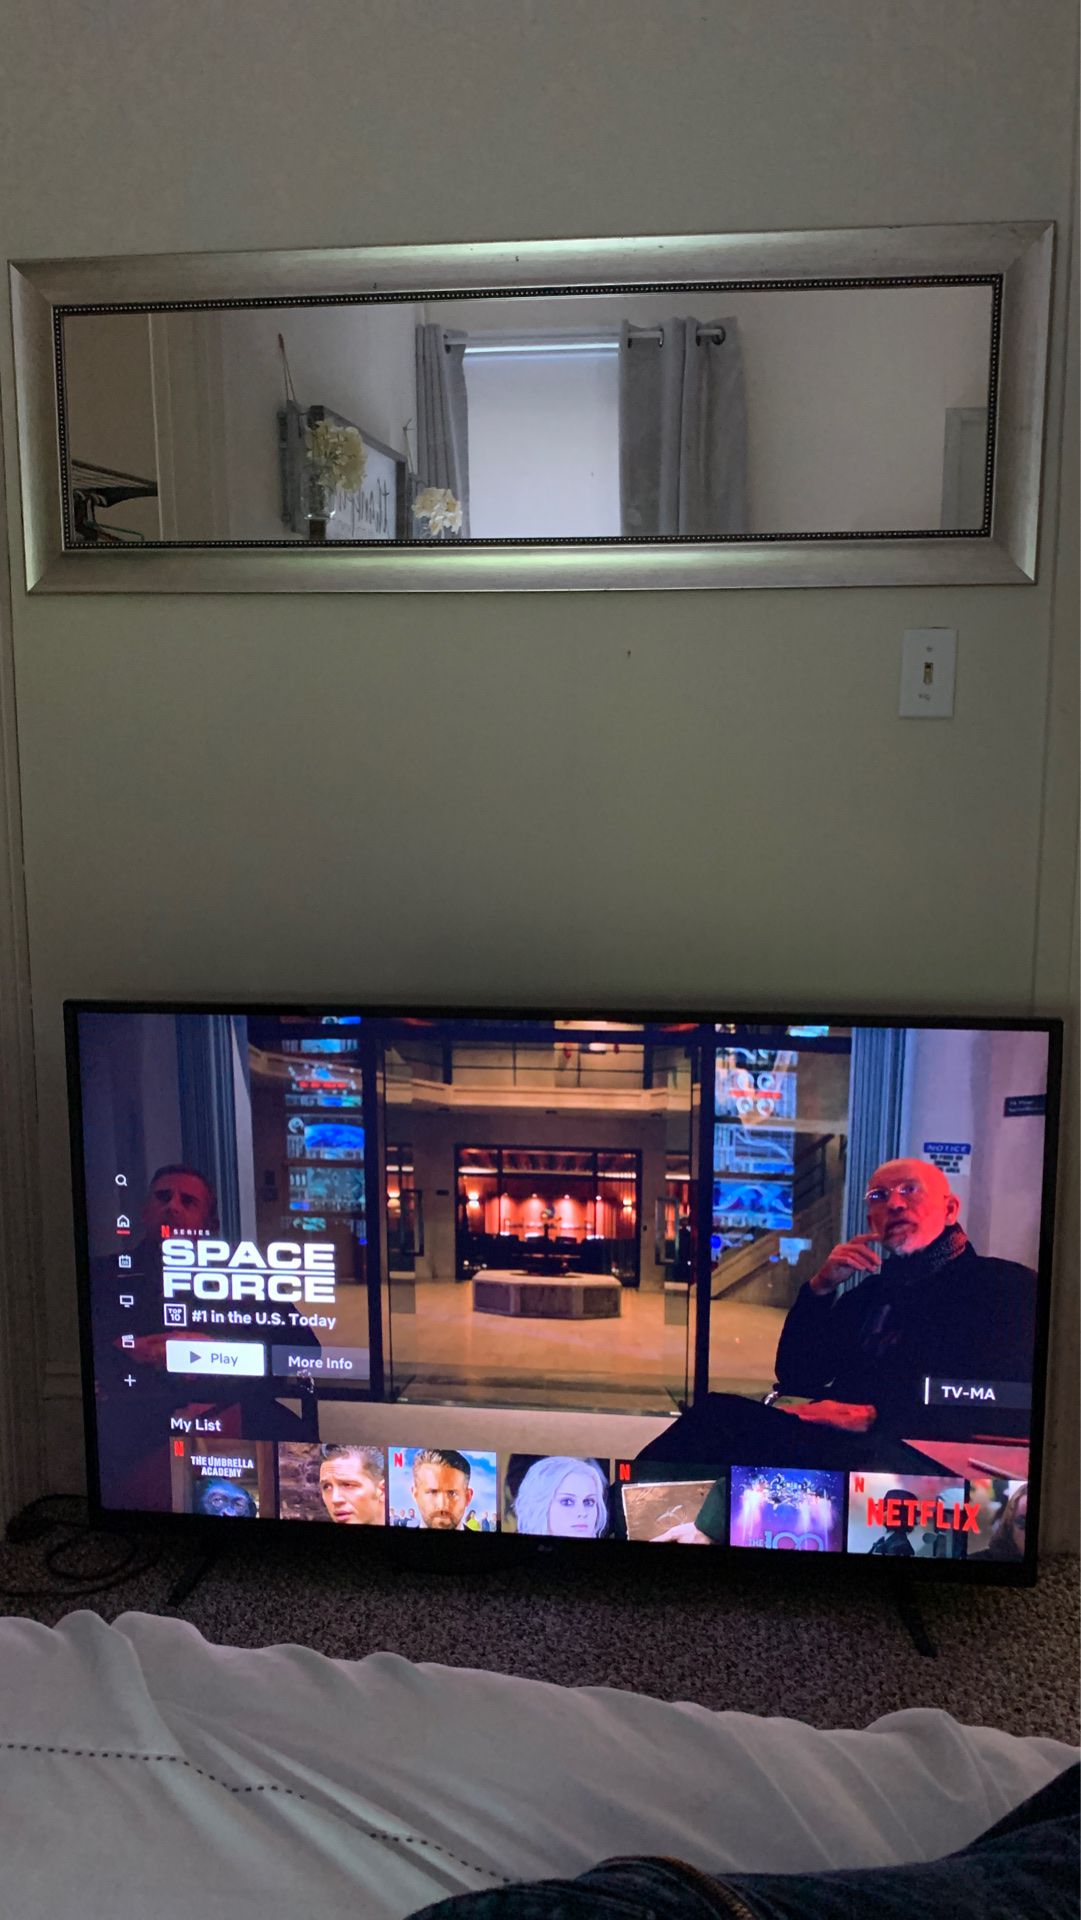 55” LG flat screen tv with remote